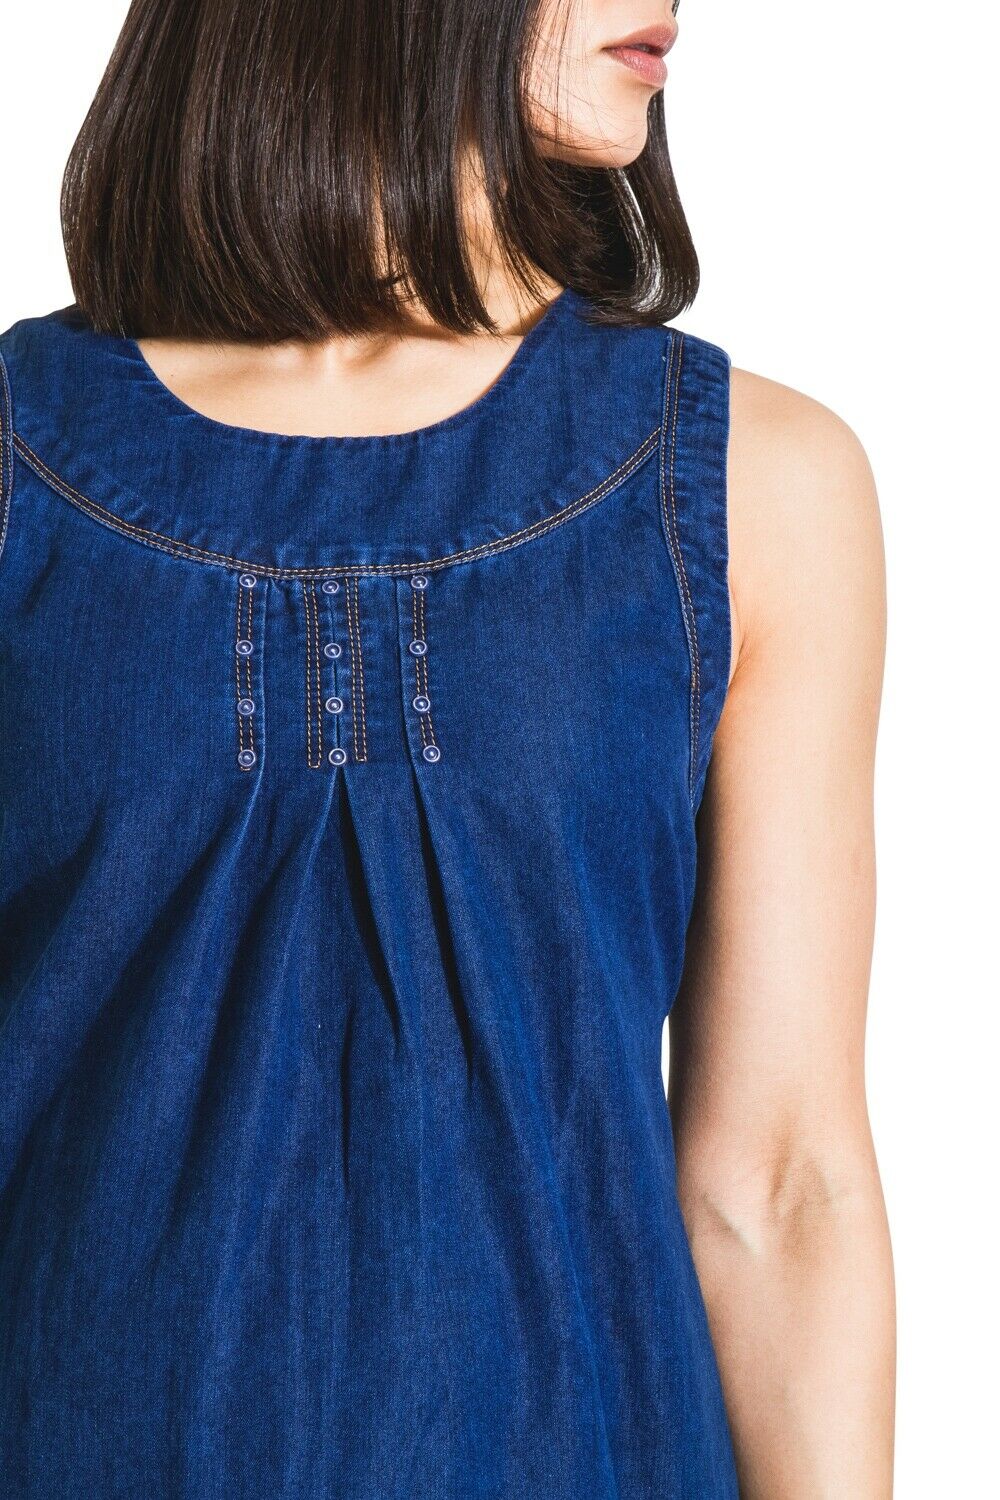 Mid view of the front of the Tina sleeveless denim maternity dress with view of neckline and decorative stitch detailing.